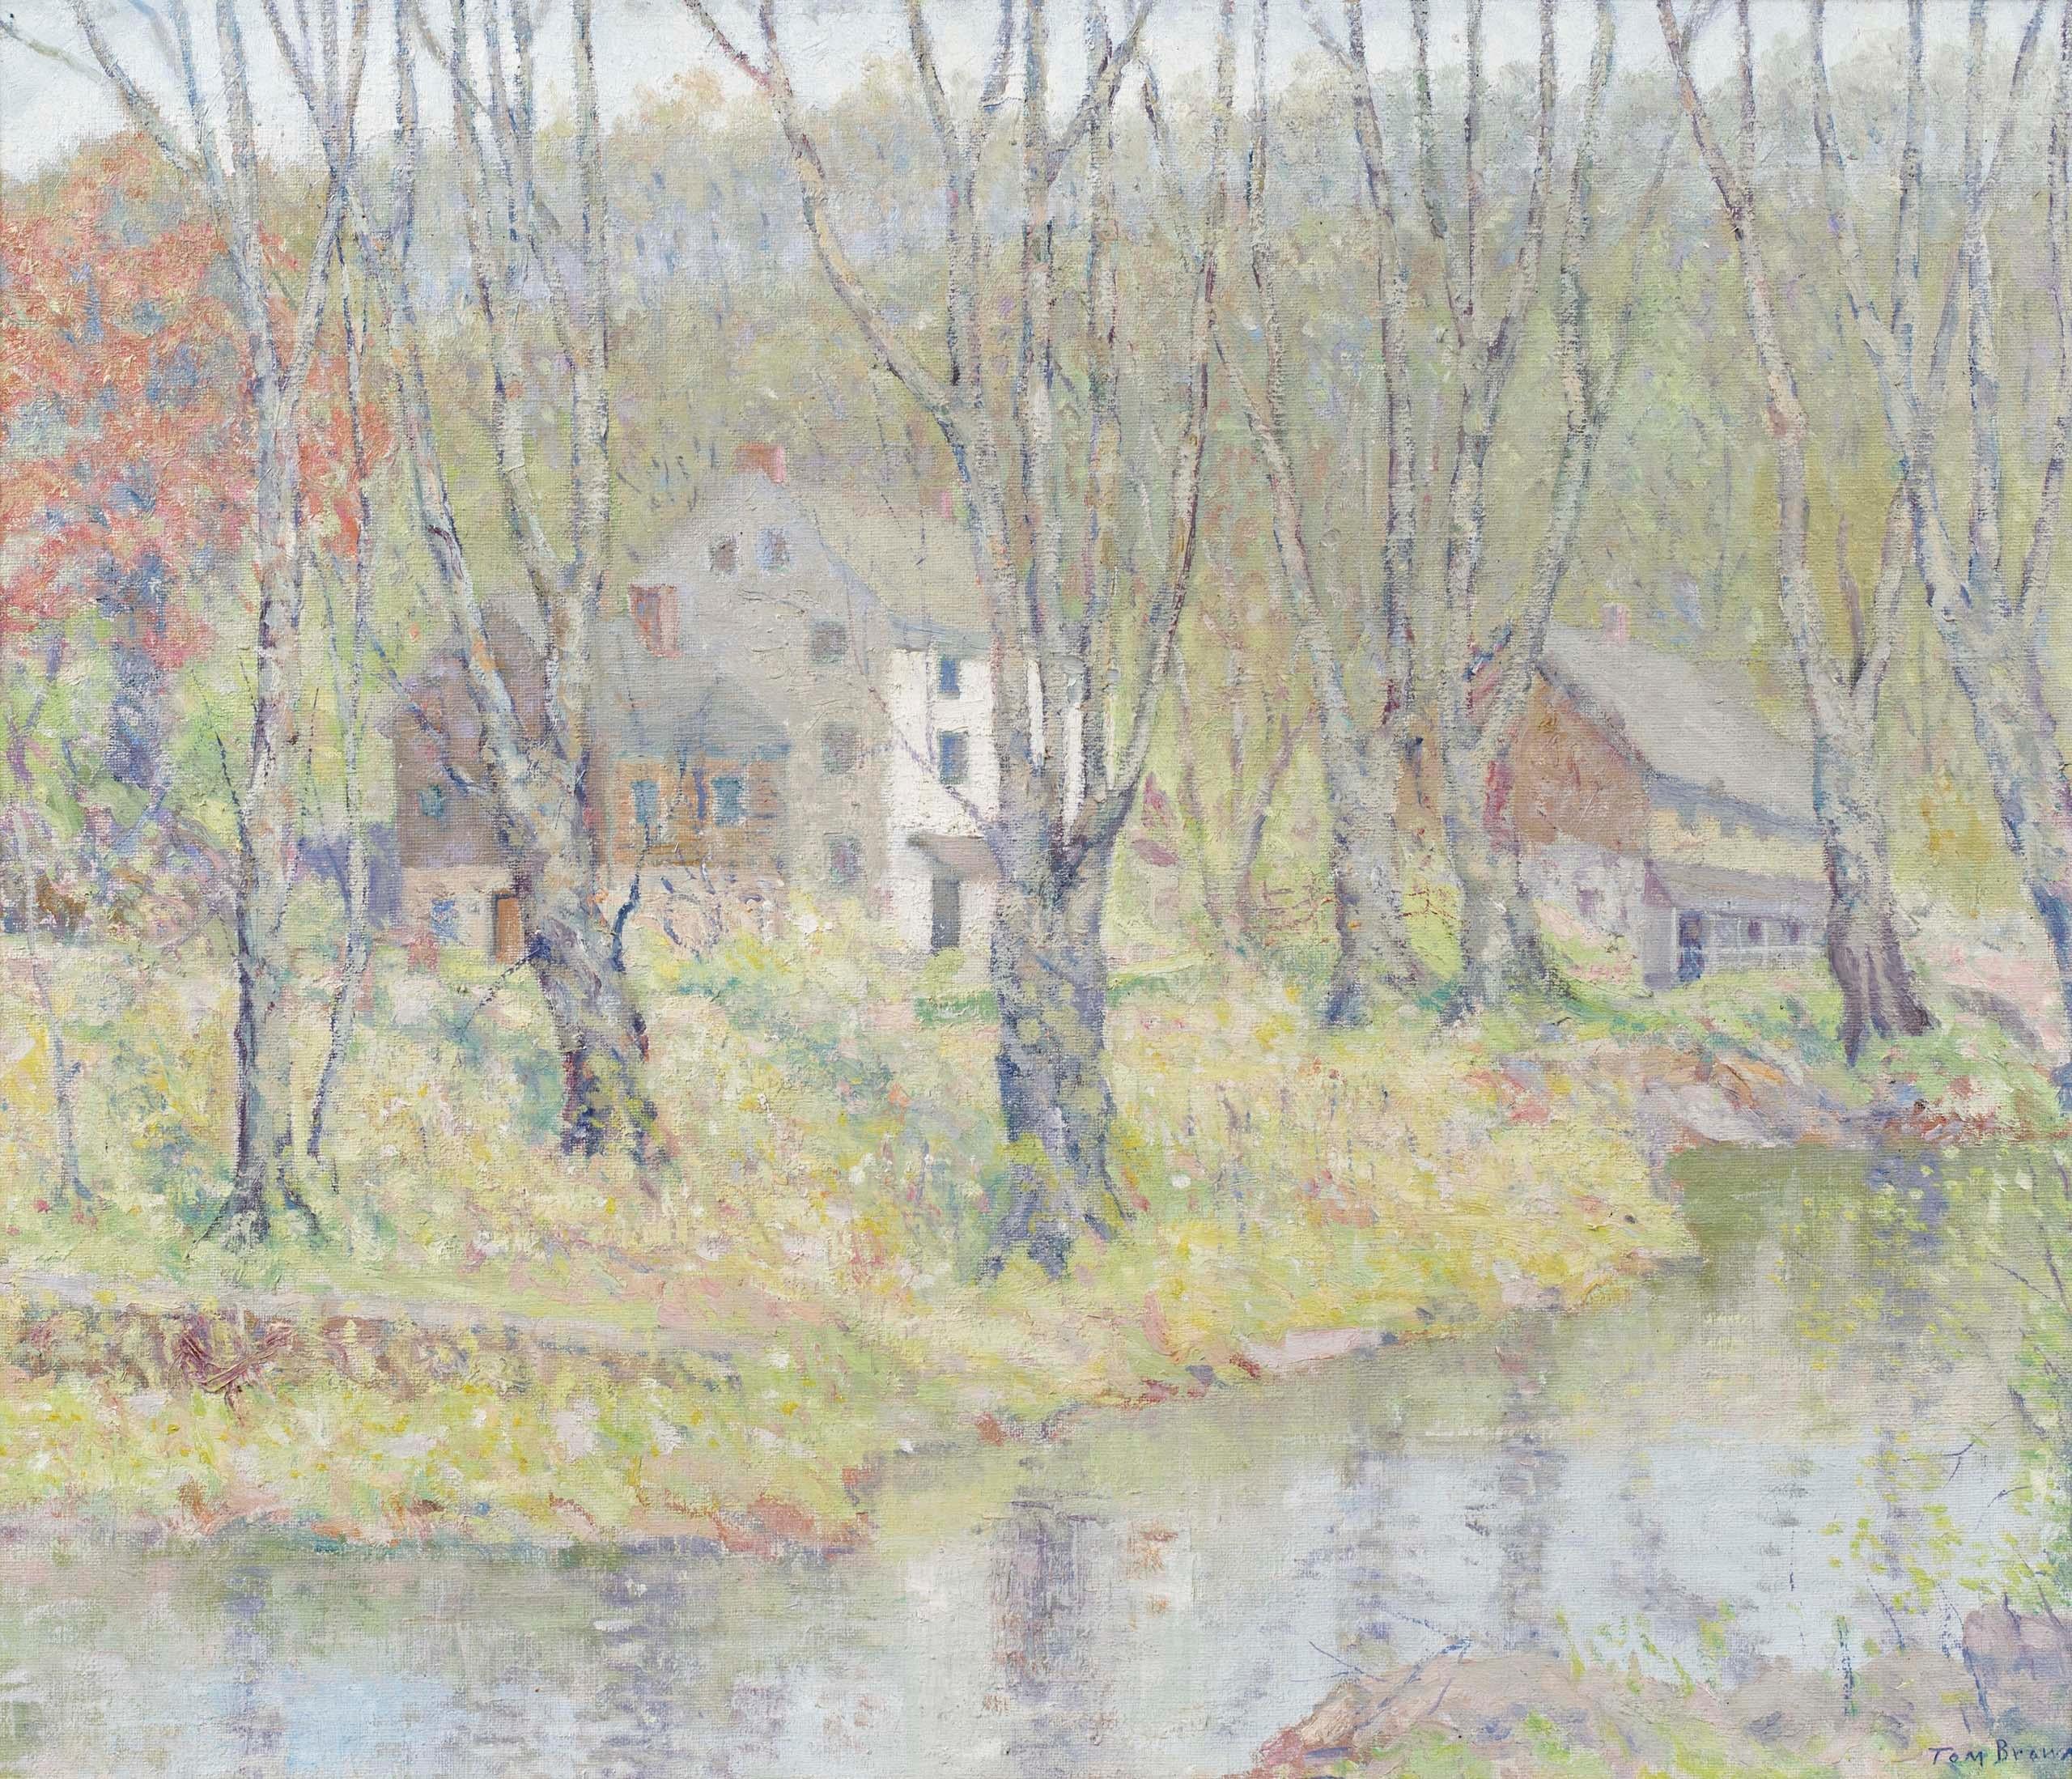 Thomas Linn Brown  (1859-1916)
Houses by the River
Oil on canvas
24 x 28 inches
Signed lower right
